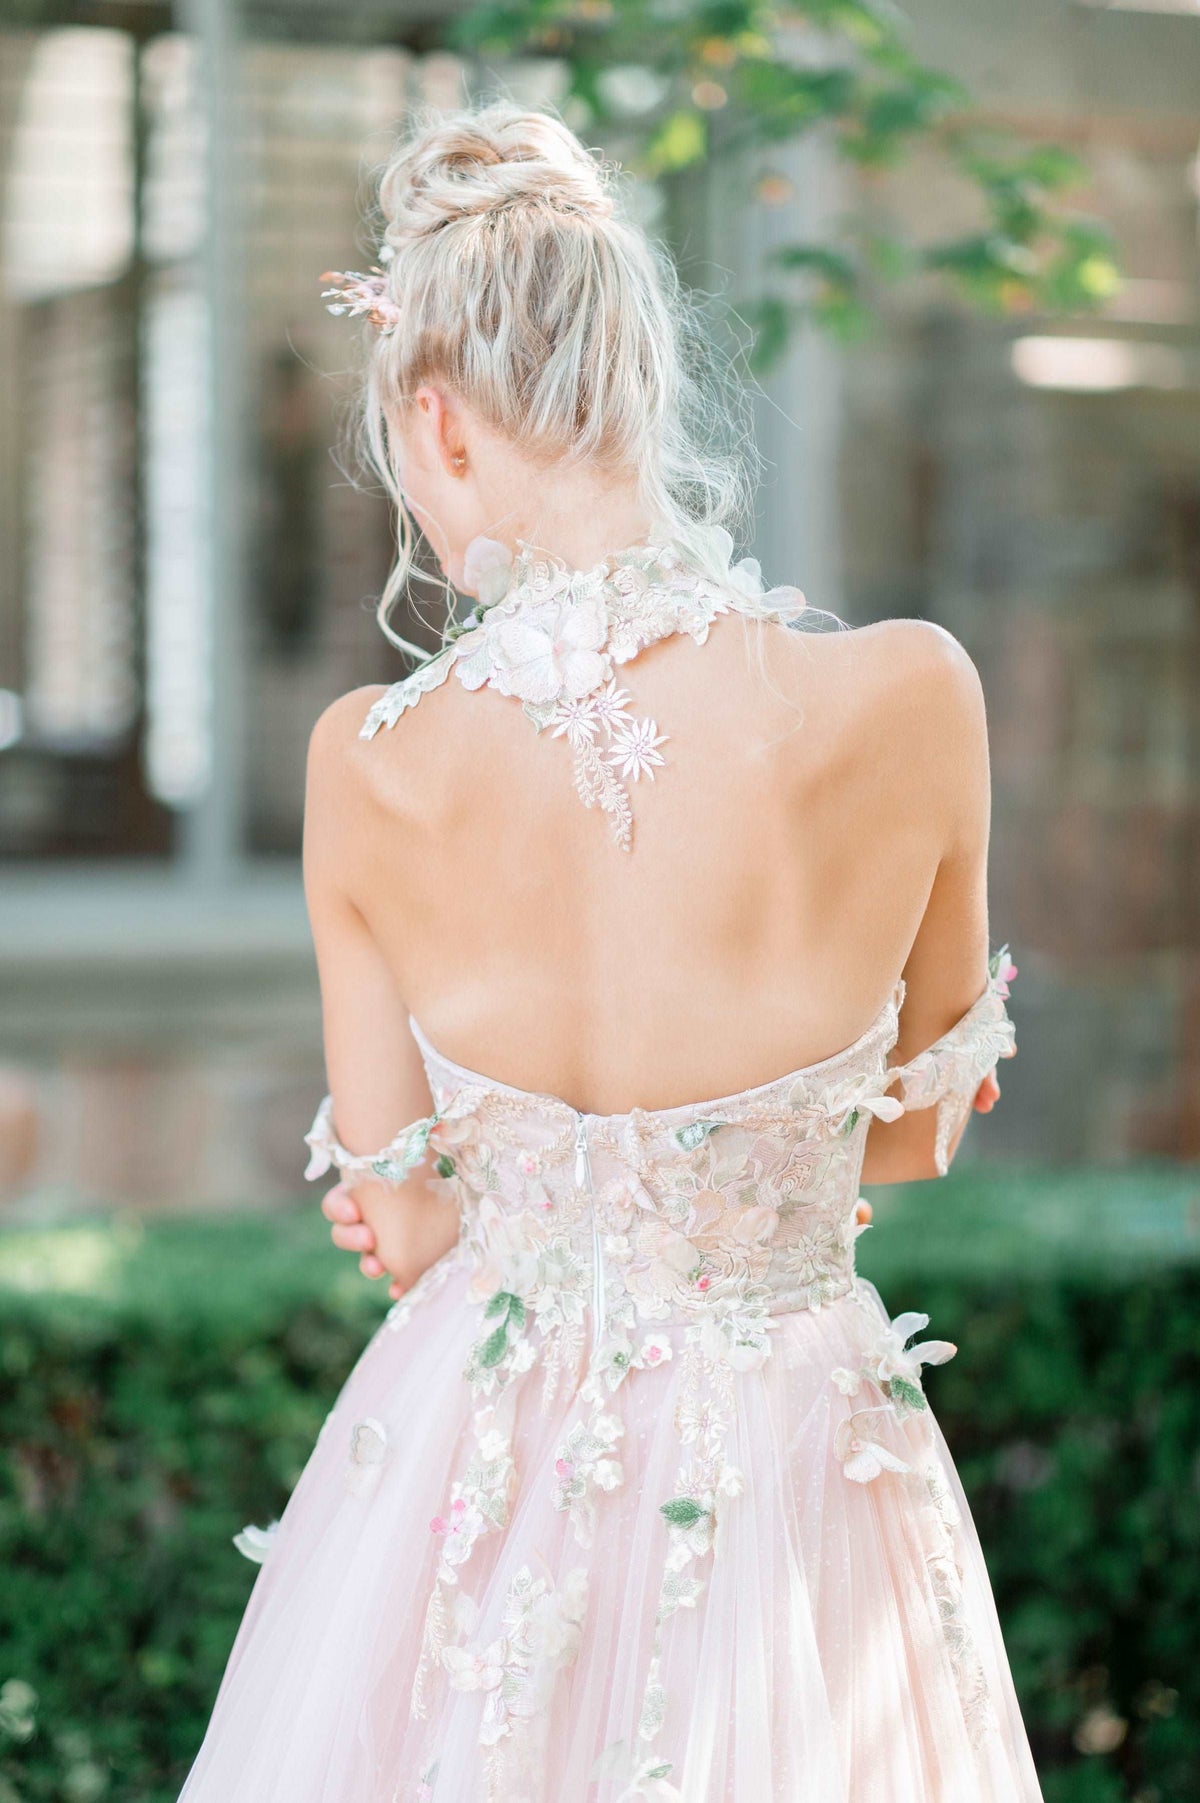 Whimsical and romantic fairy tail inspired pink wedding dress for unconventionally cool brides. Custom made wedding dress by Catherine Langlois, Toronto, Canada